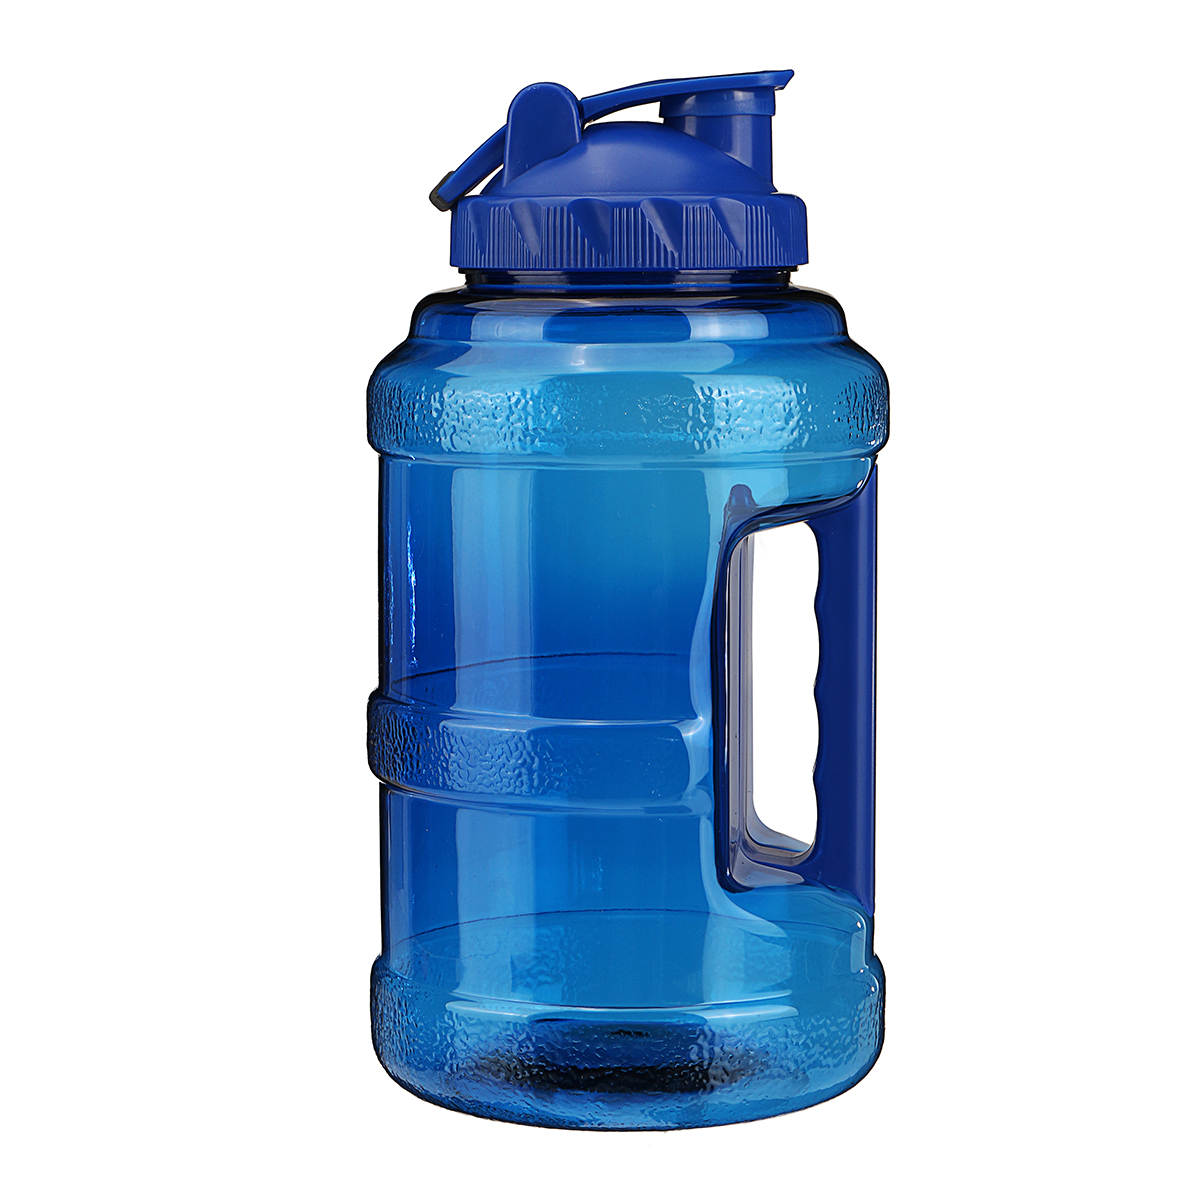 25L-Large-Capacity-Sports-Water-Bottle-with-Handle-PET-Portable-Bucket-Cup-Outdoor-Sports-Fitness-Cu-1898505-2